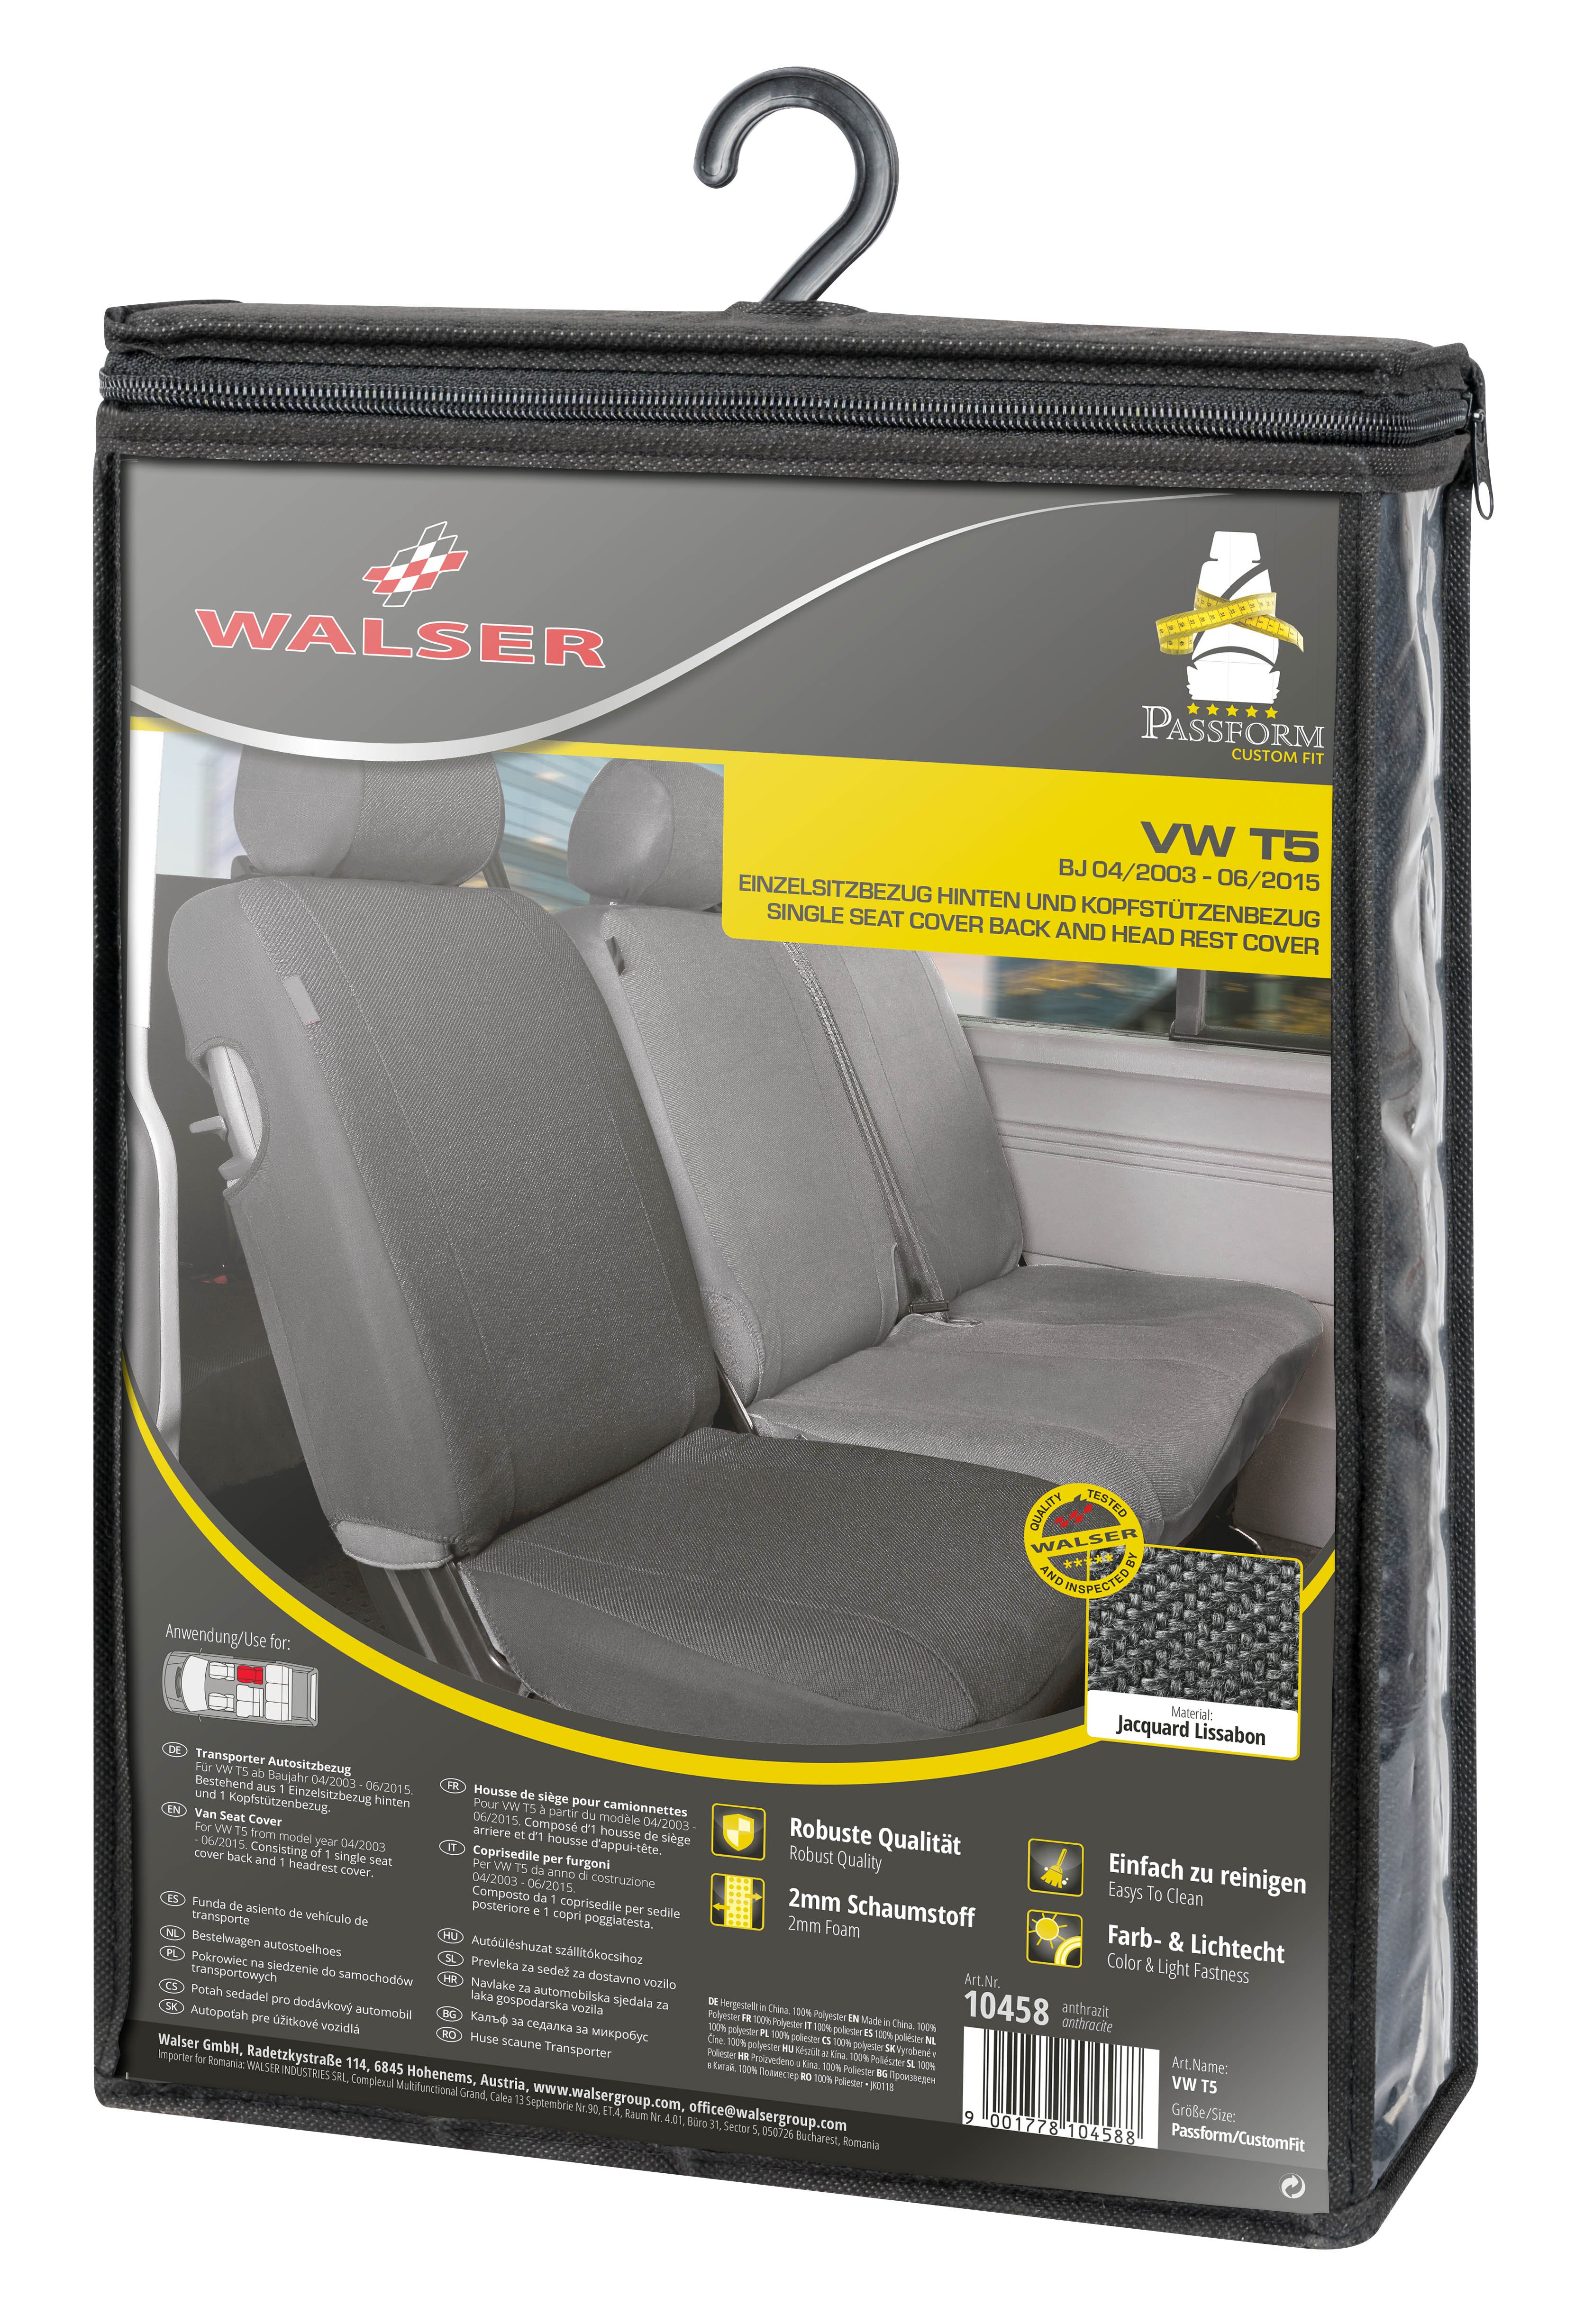 Car Seat cover Transporter made of fabric for VW T5, single seat rear